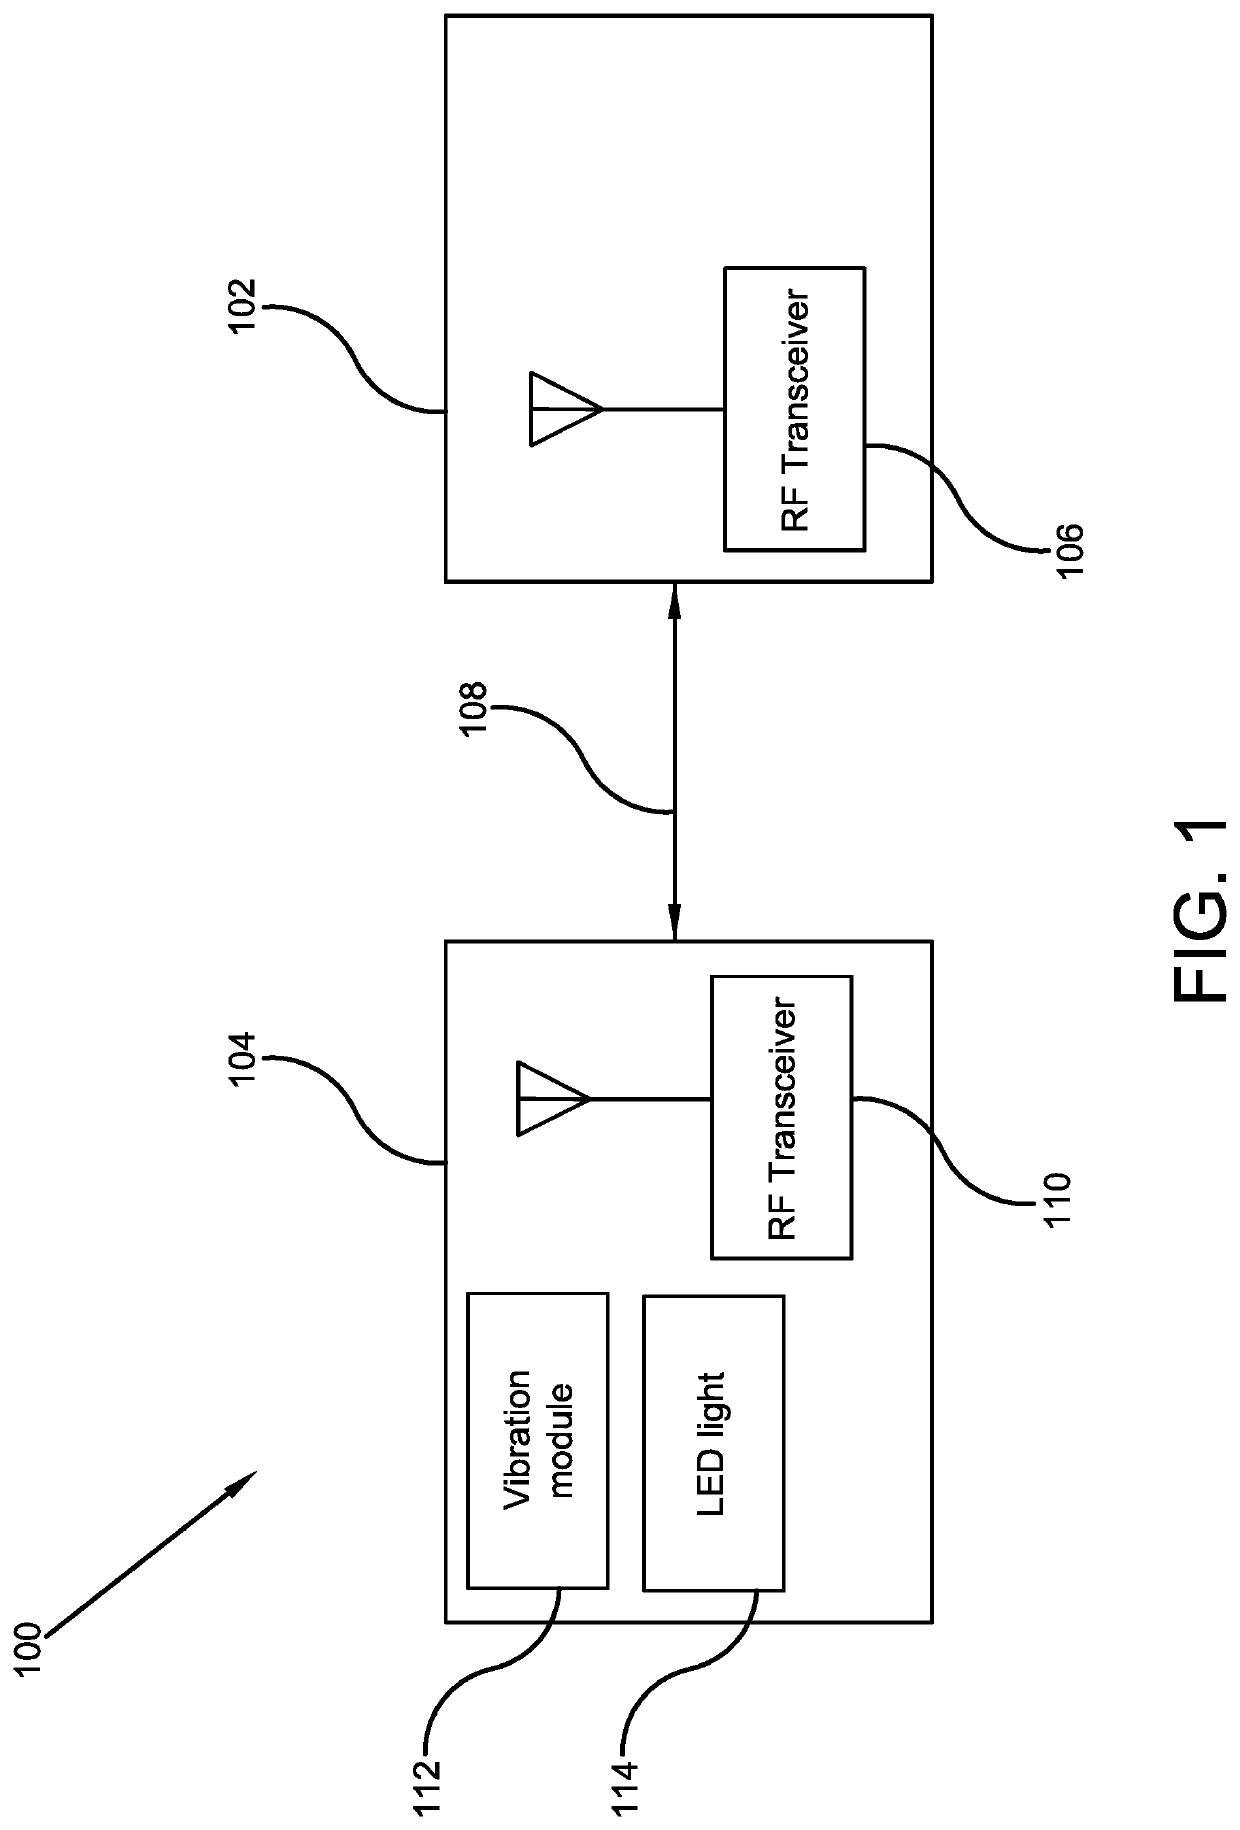 Remote-Control Device and Method for Locating a Parked Vehicle